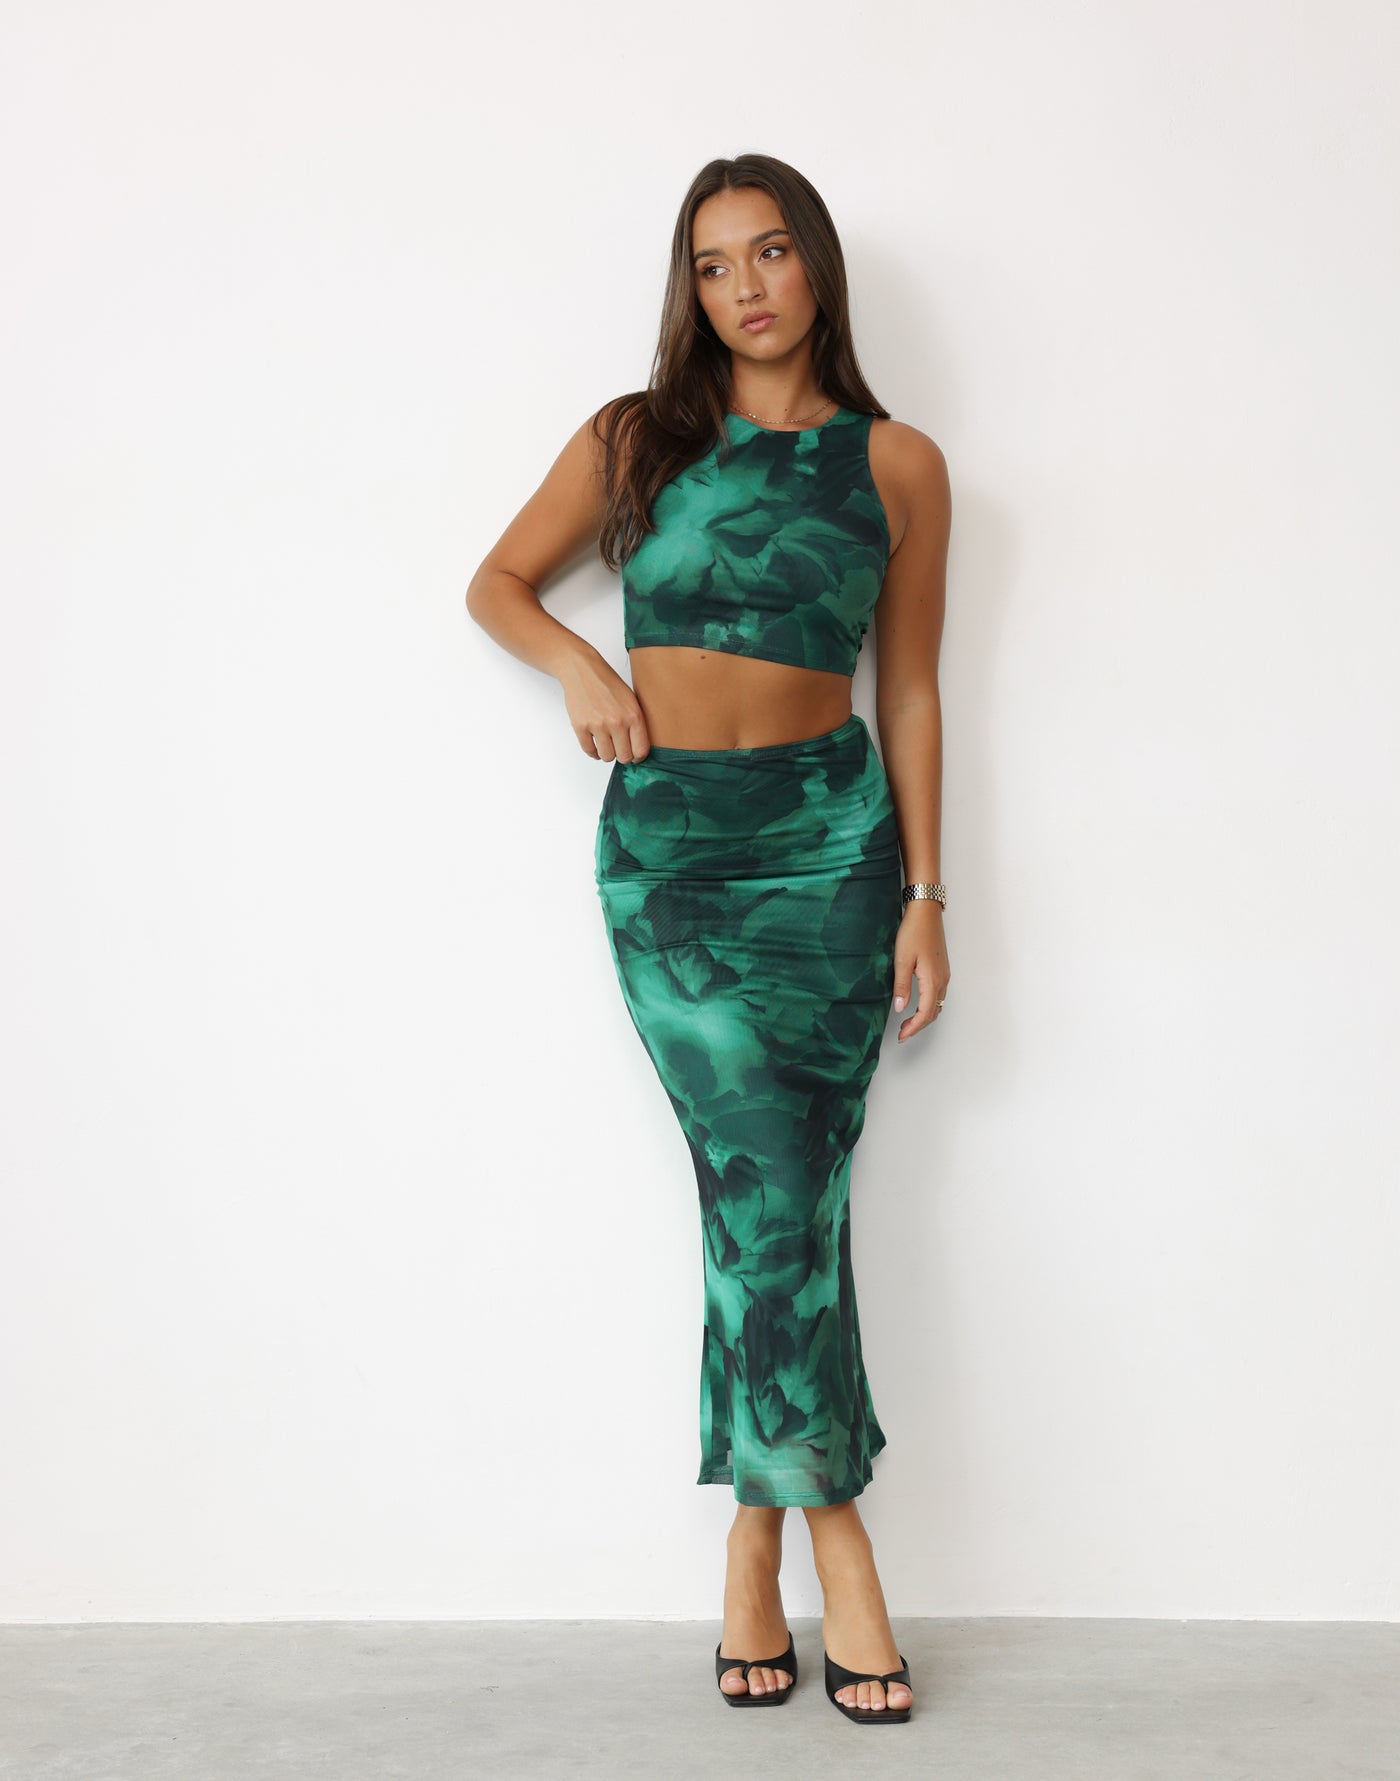 Clare Top (Jade) - Printed High Round Neckline Cropped Top - Women's Top - Charcoal Clothing